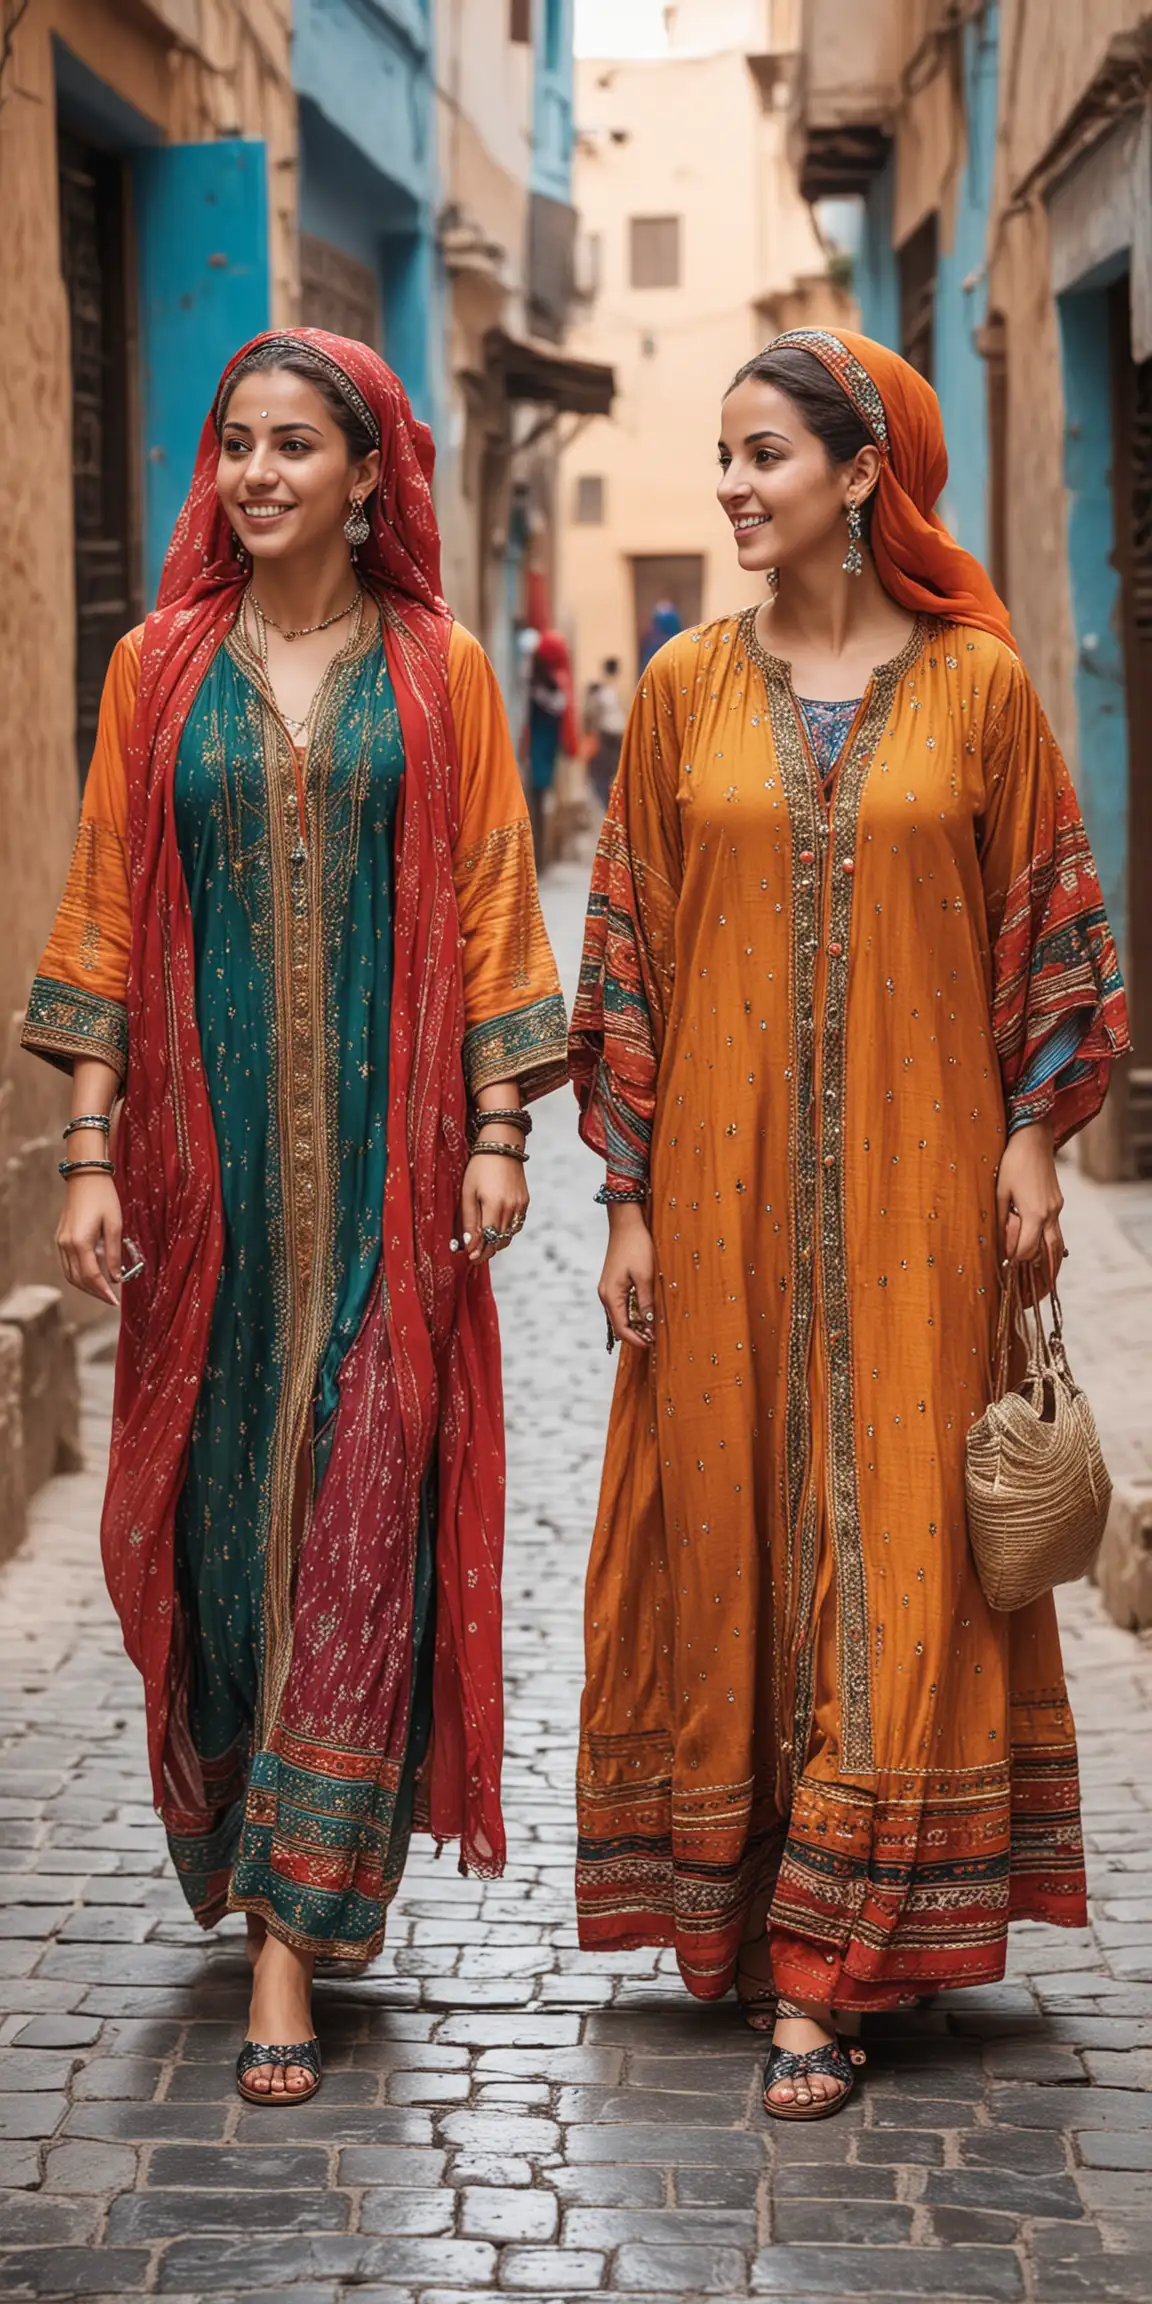 Moroccan Women in Traditional Street Dress Profile View